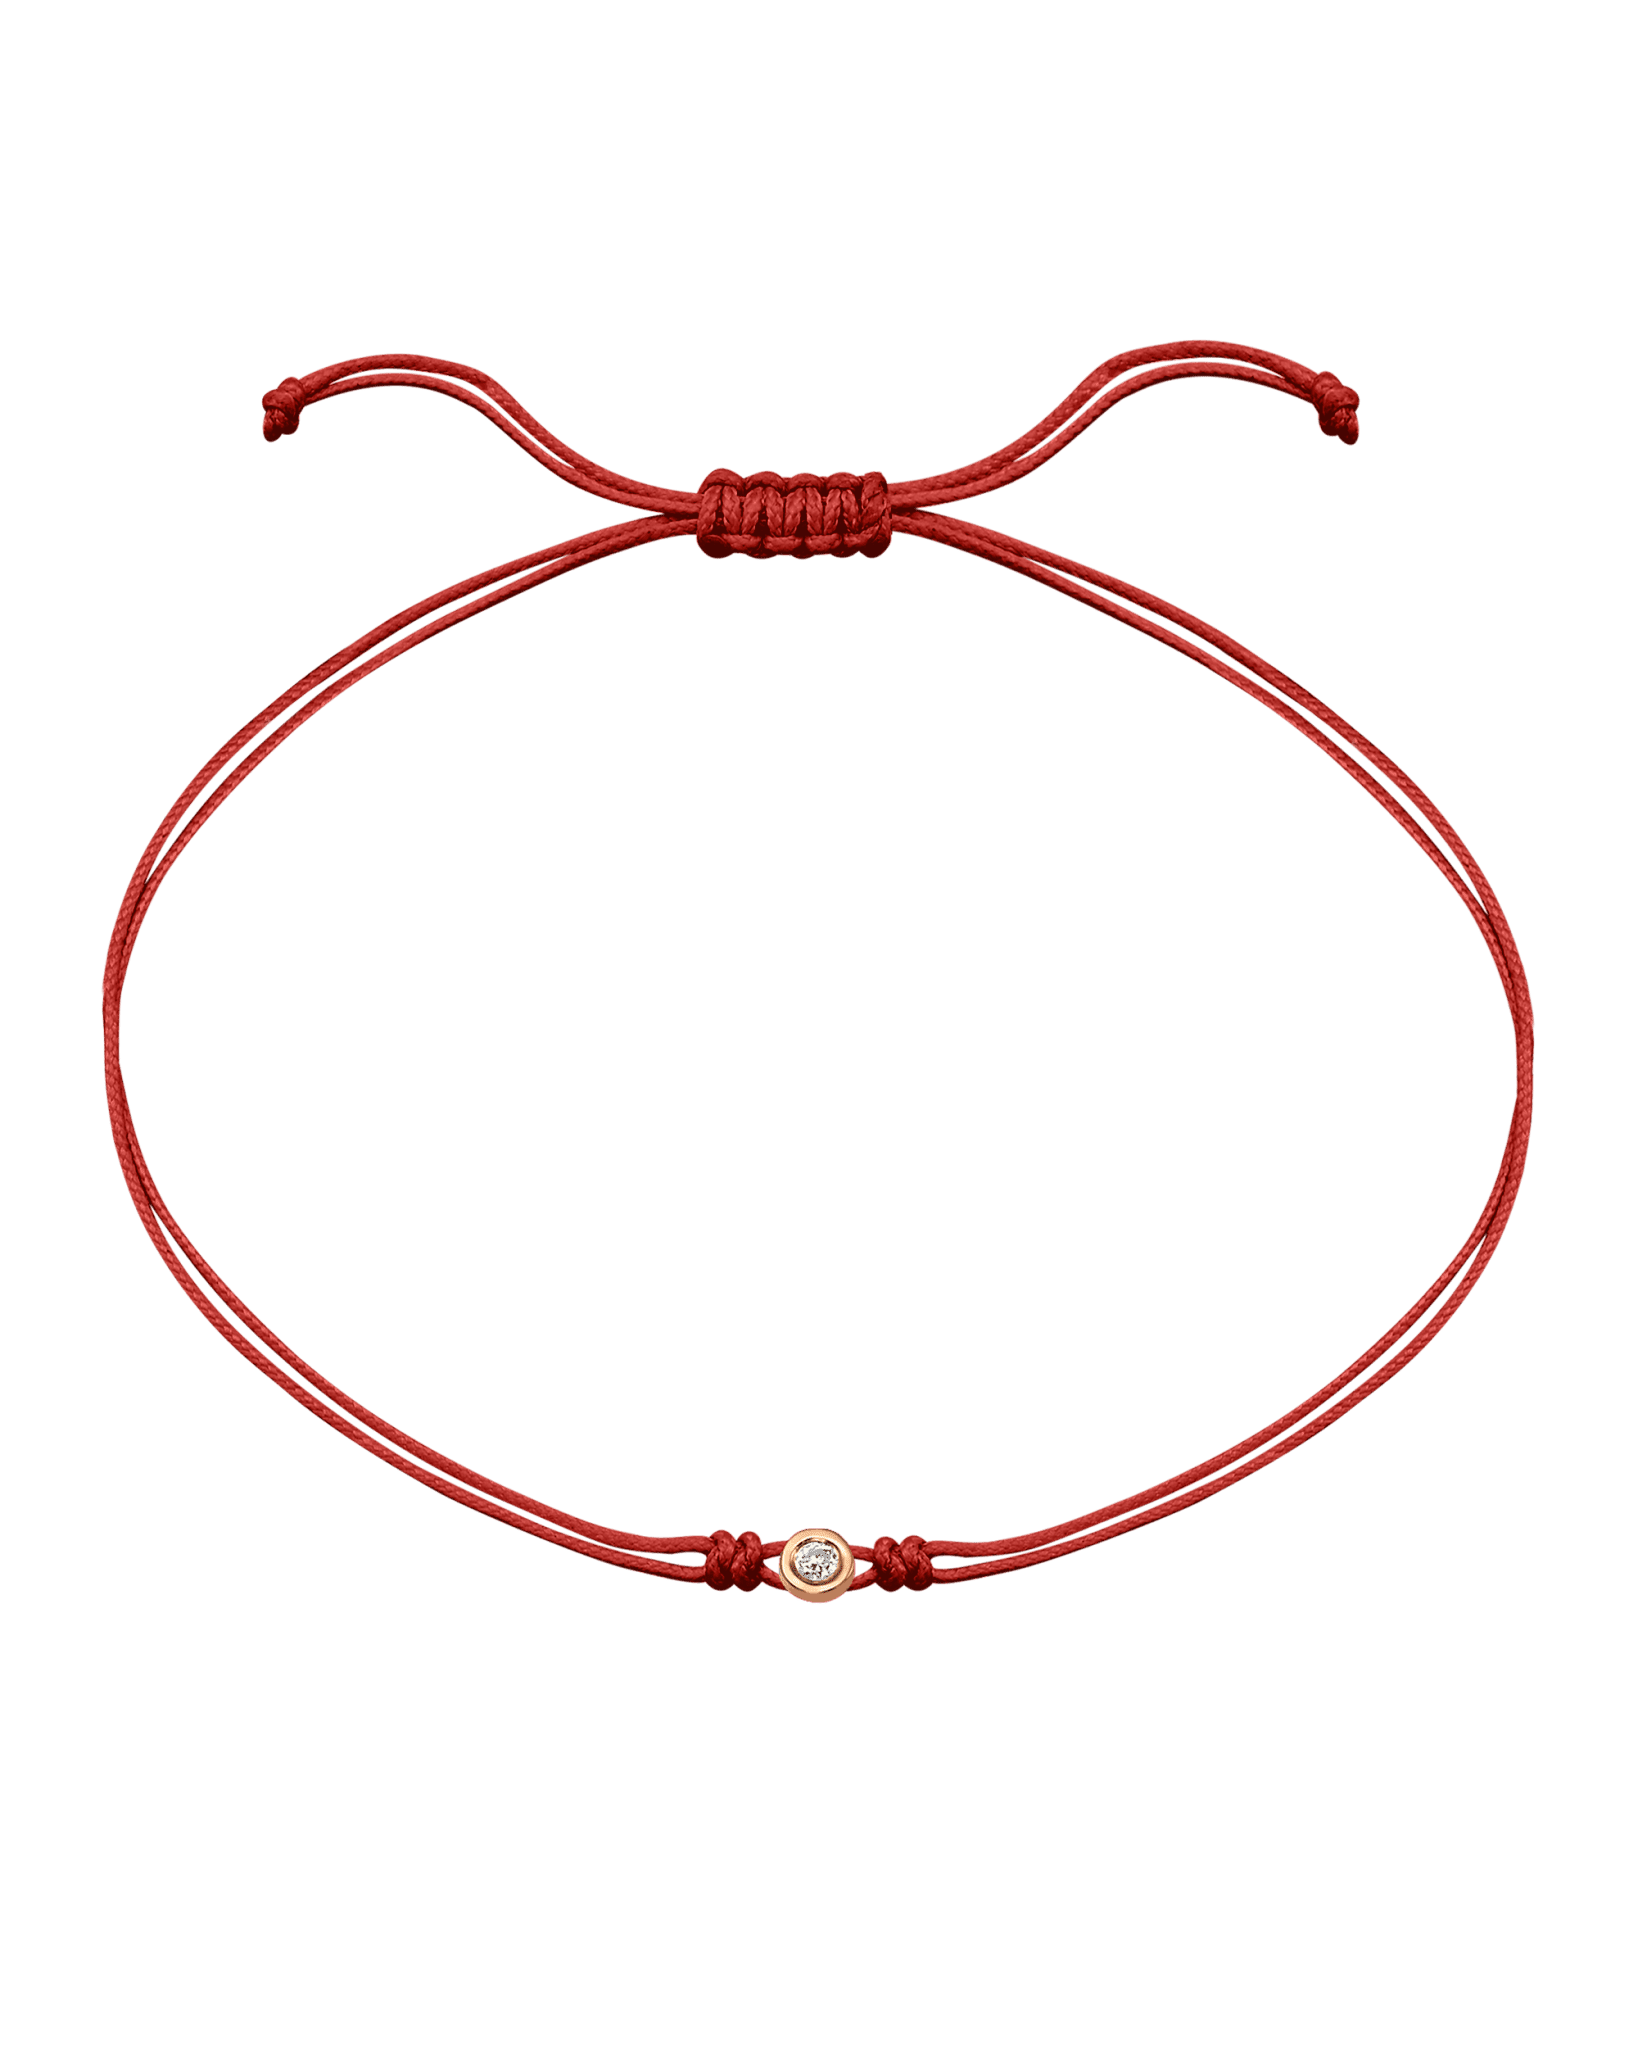 Le String of Love - Or Rose 14 carats Bracelets magal-dev Rouge Small: 0.03 carats 